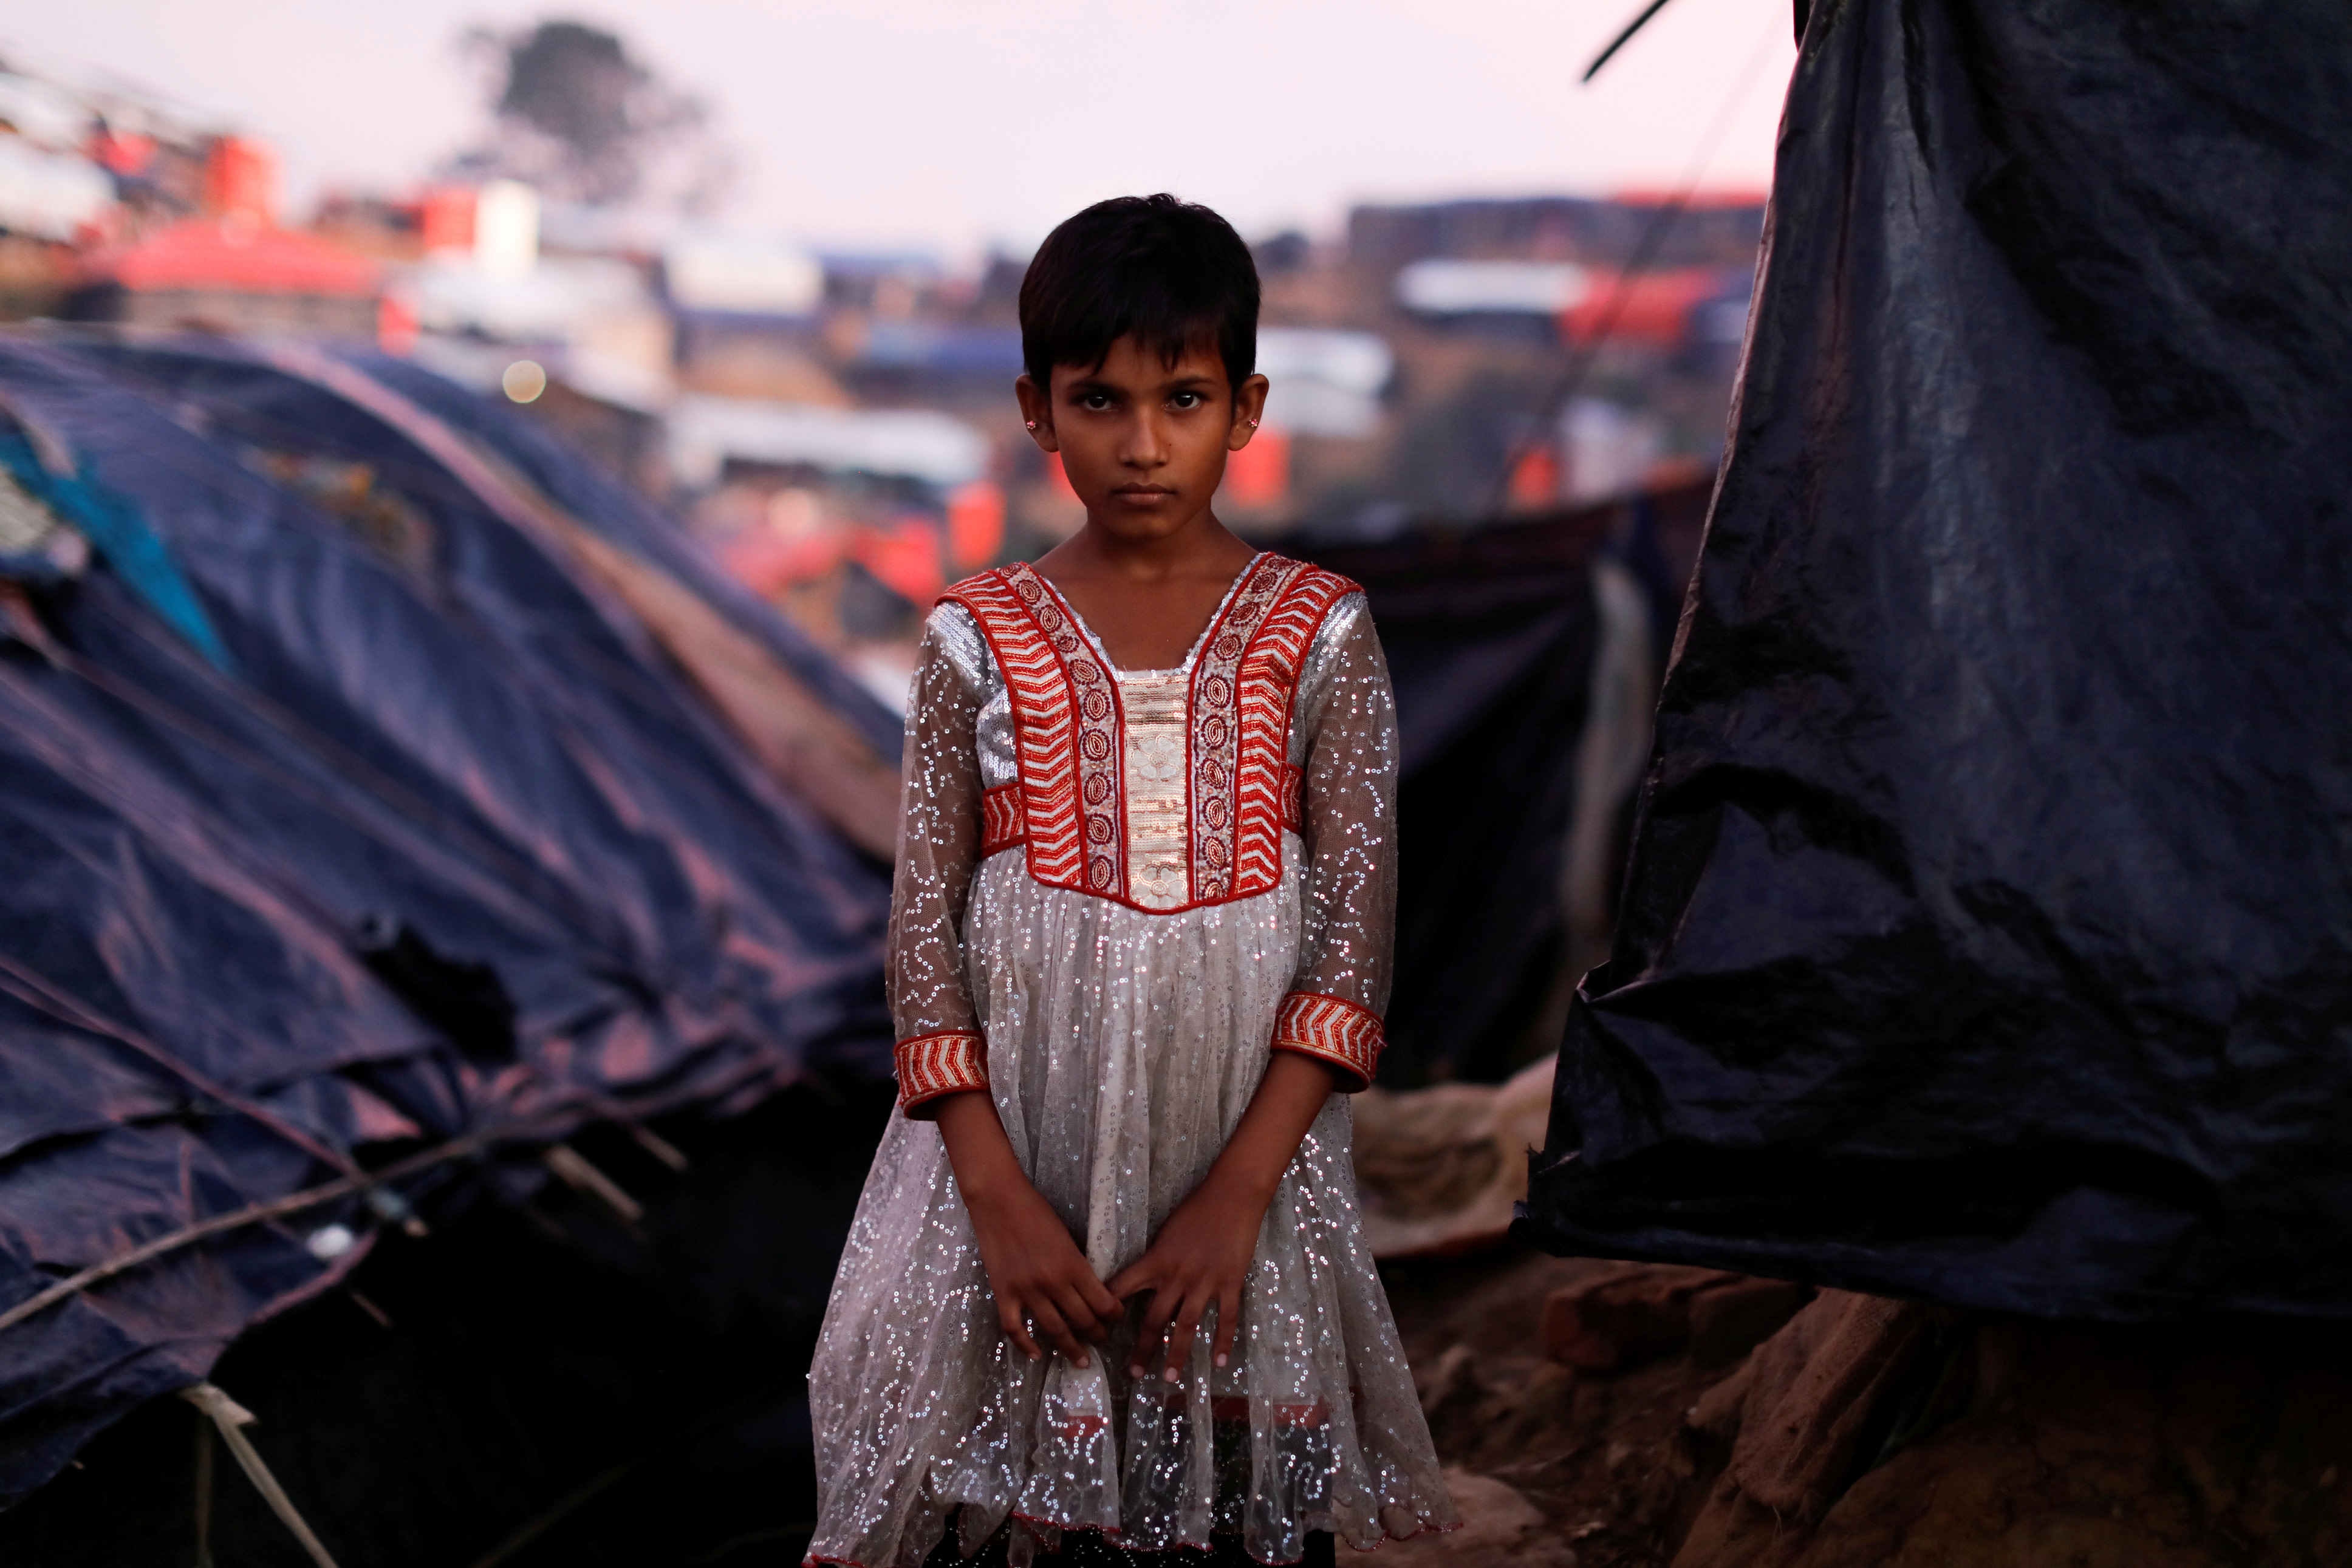 Mujan Begum, a 8-year-old Rohingya refugee, who arrived one month ago with her family poses outside her makeshift tent at a refugee camp near Cox's Bazar, Bangladesh October 11, 2017. (Reuters)